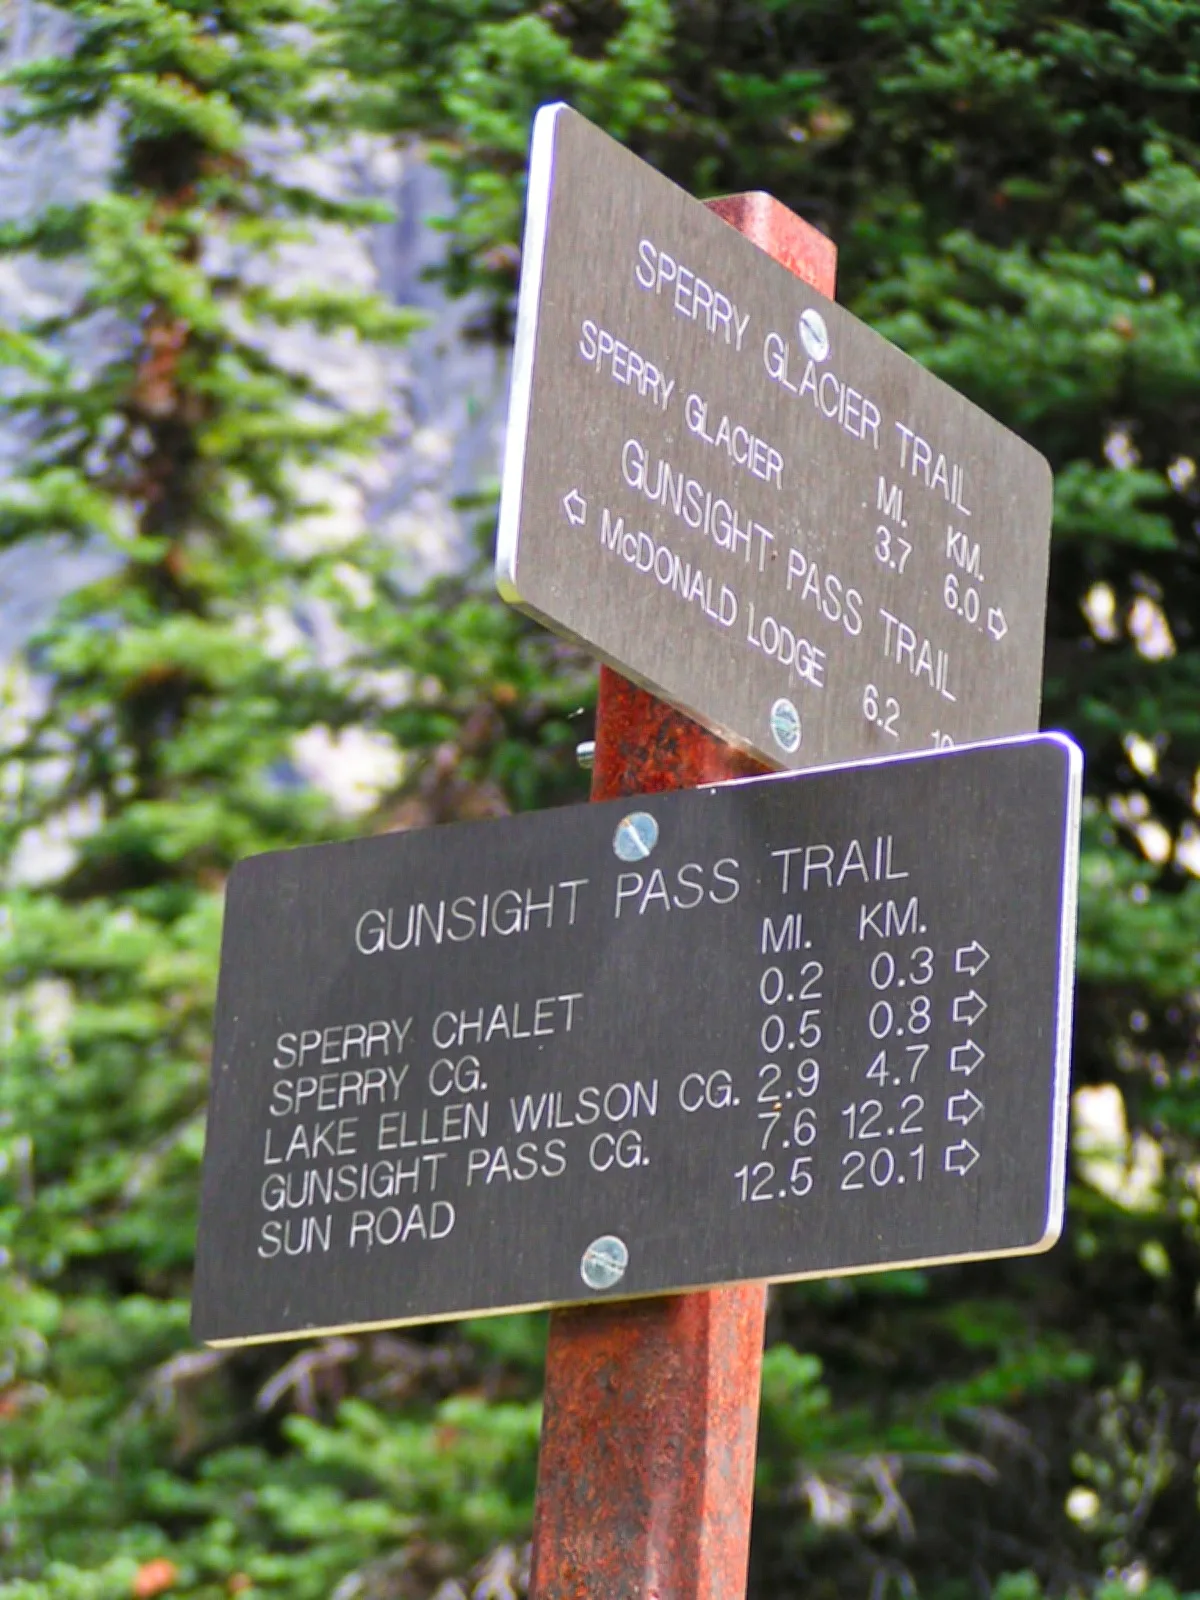 Sperry Chalet Hiking Trail Distance Marker